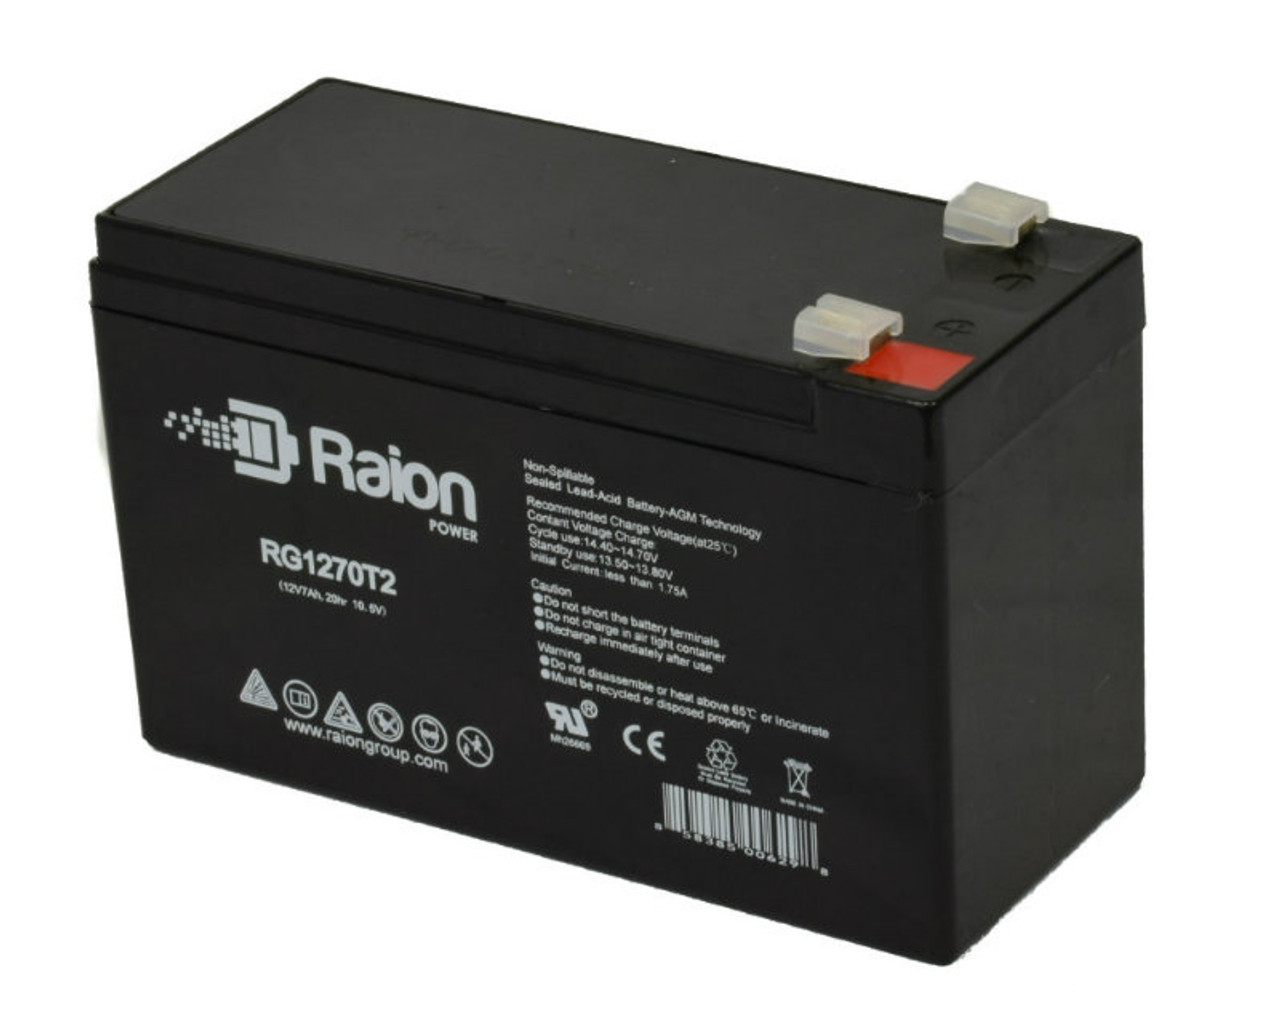 Raion Power RG1270T2 12V 7Ah Rechargeable Battery for Stannah Starla 260 Curved Stairlift